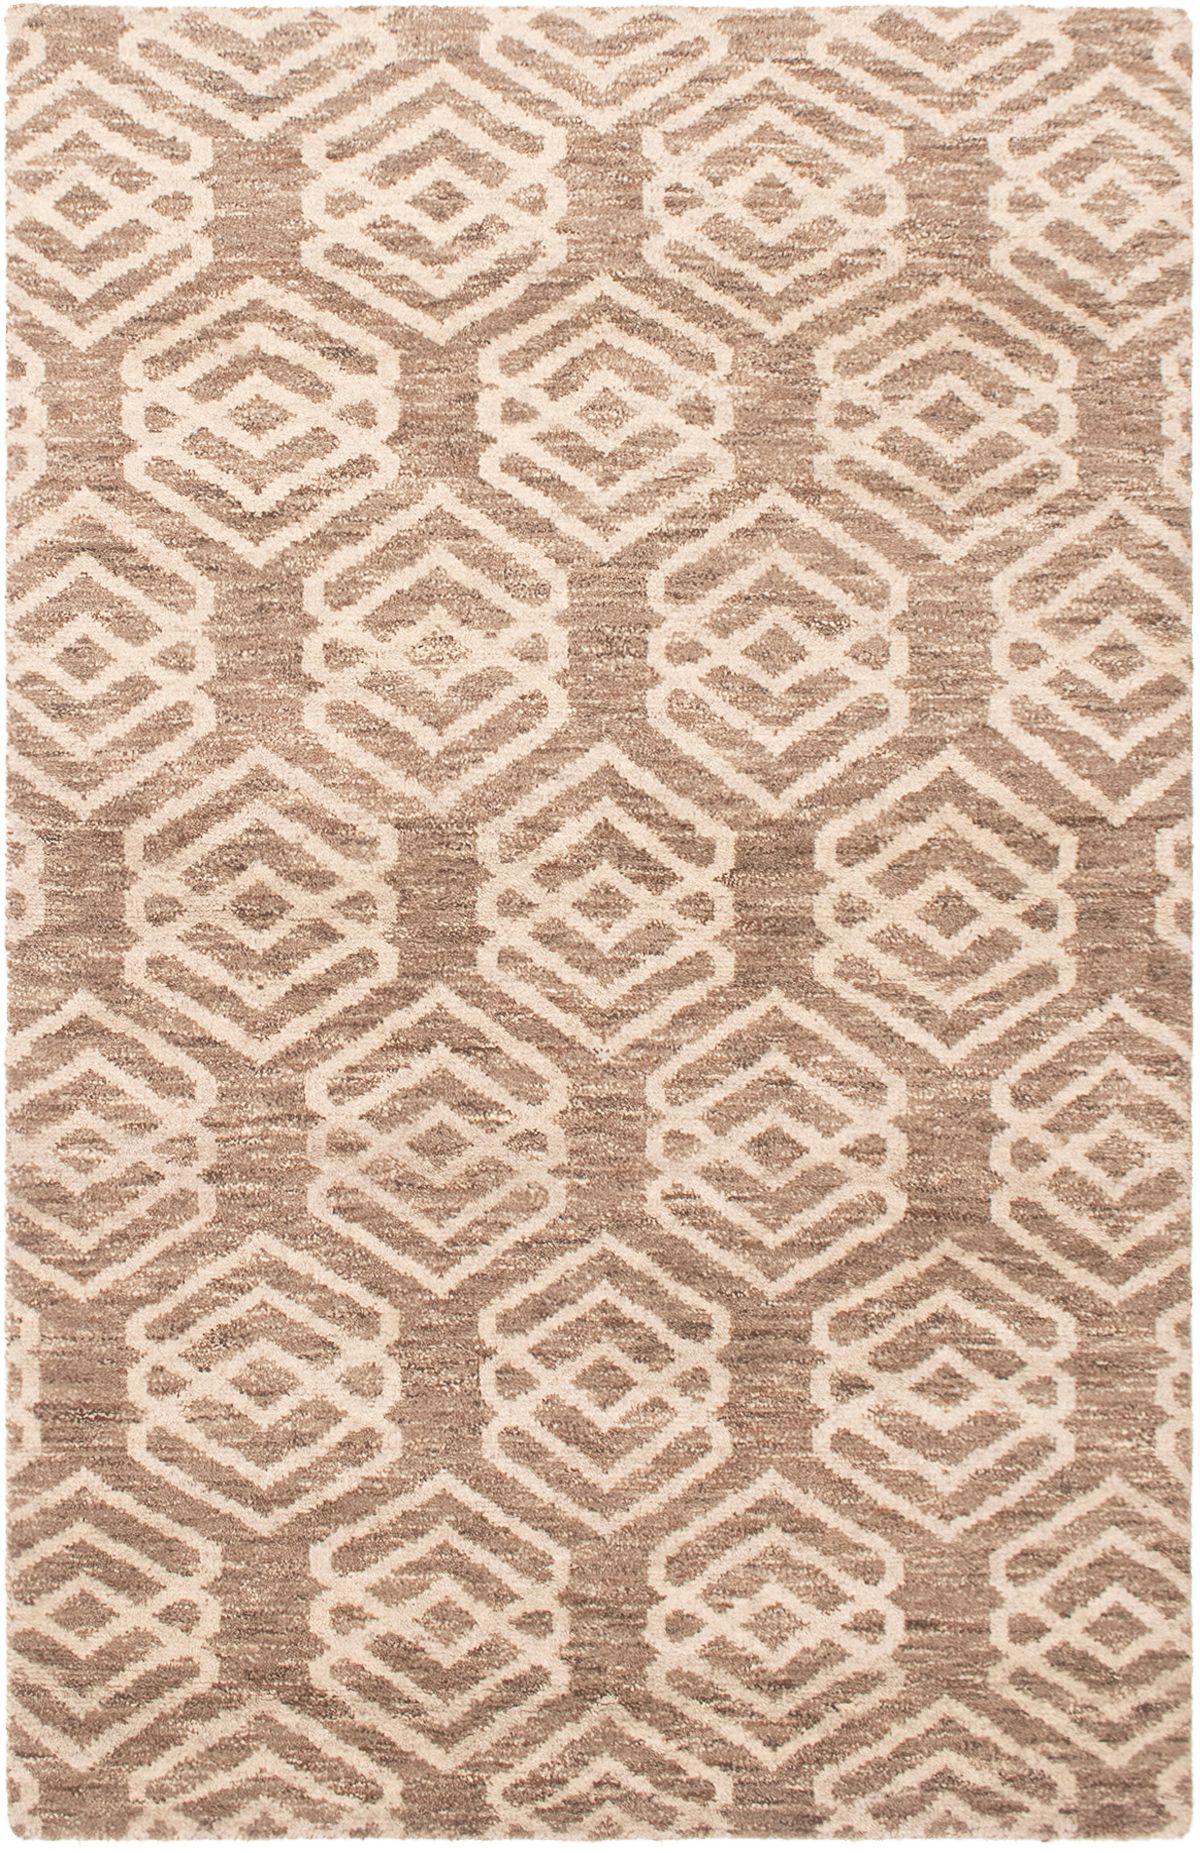 Hand-knotted Tangier Brown Wool Rug 5'2" x 8'0" Size: 5'2" x 8'0"  